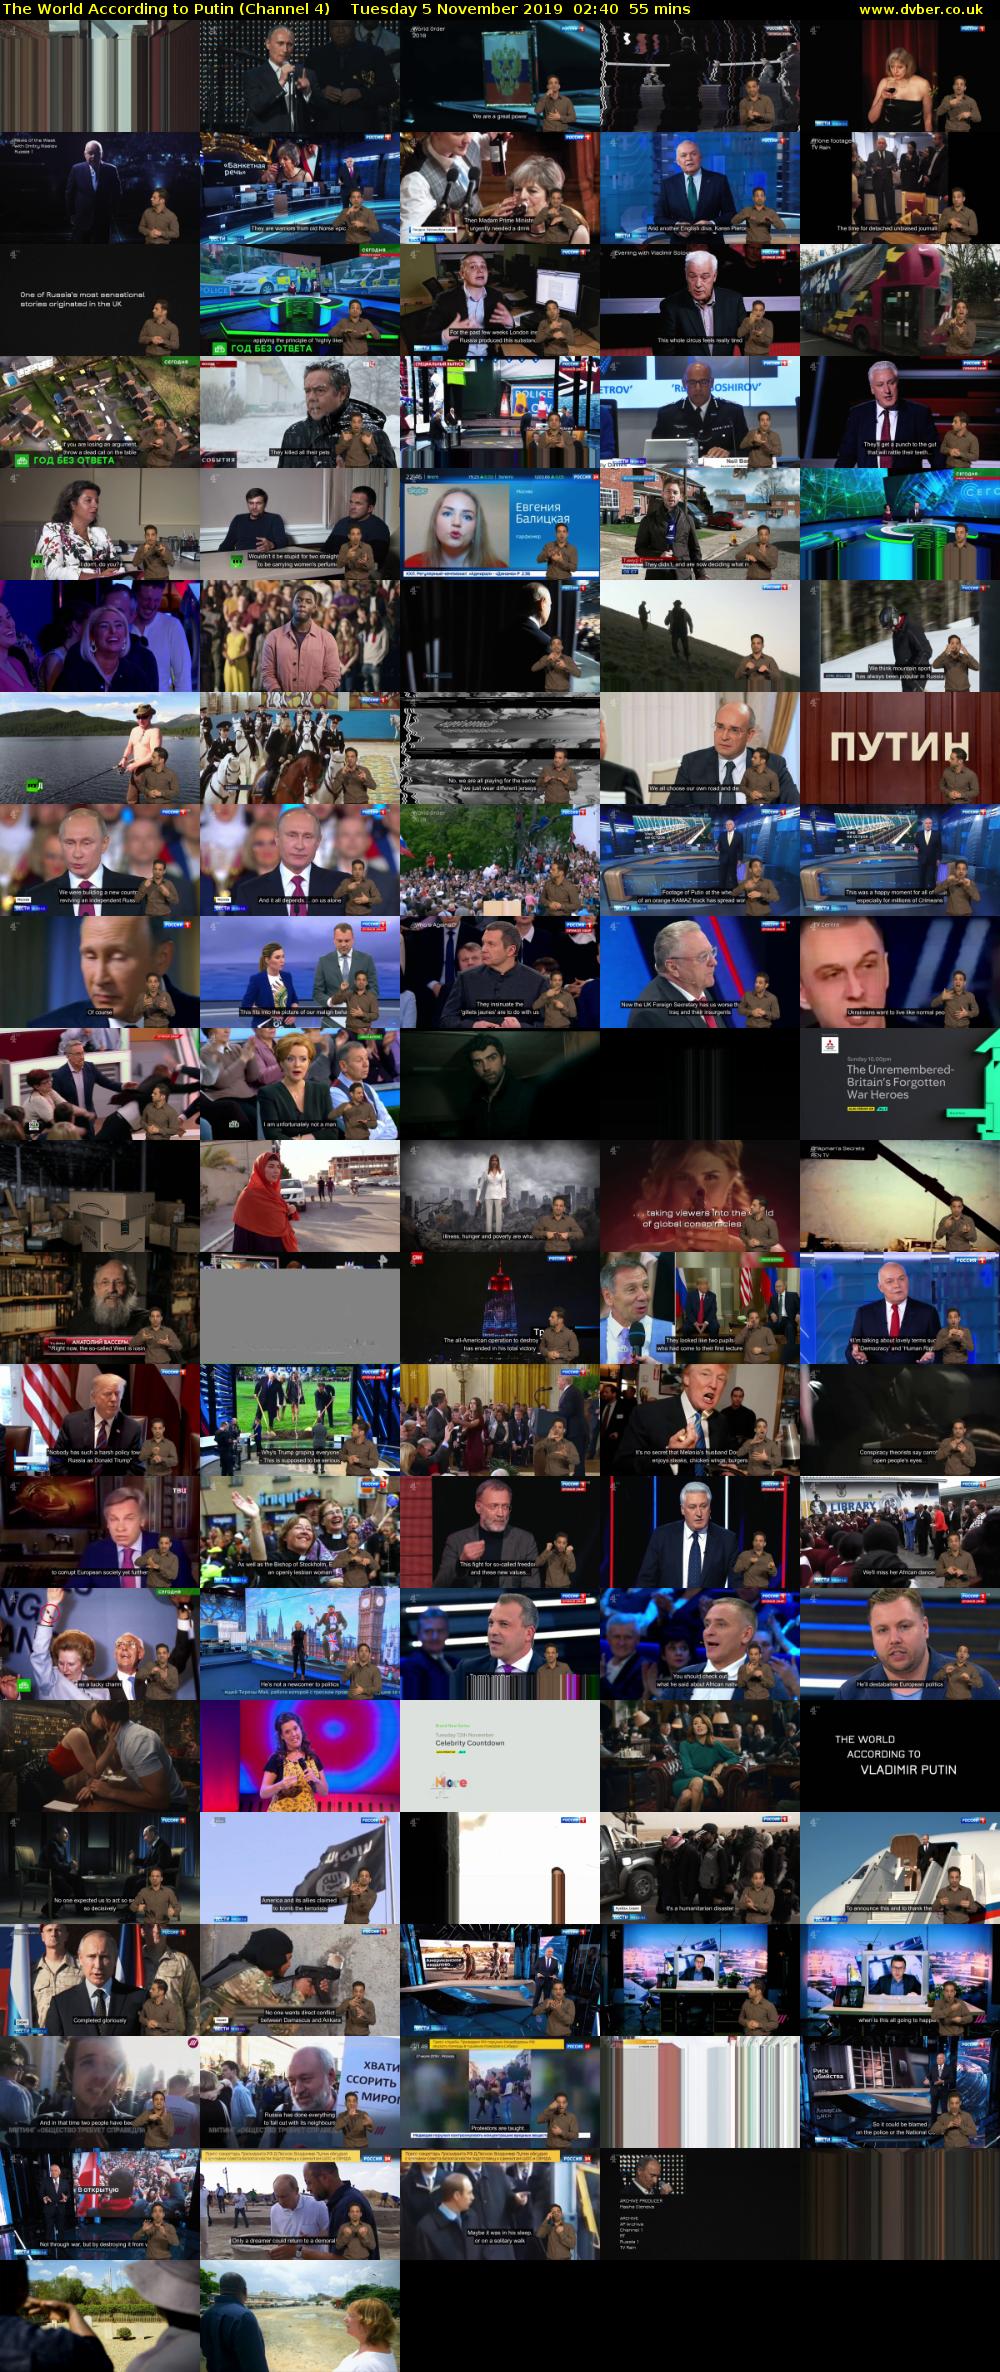 The World According to Putin (Channel 4) Tuesday 5 November 2019 02:40 - 03:35